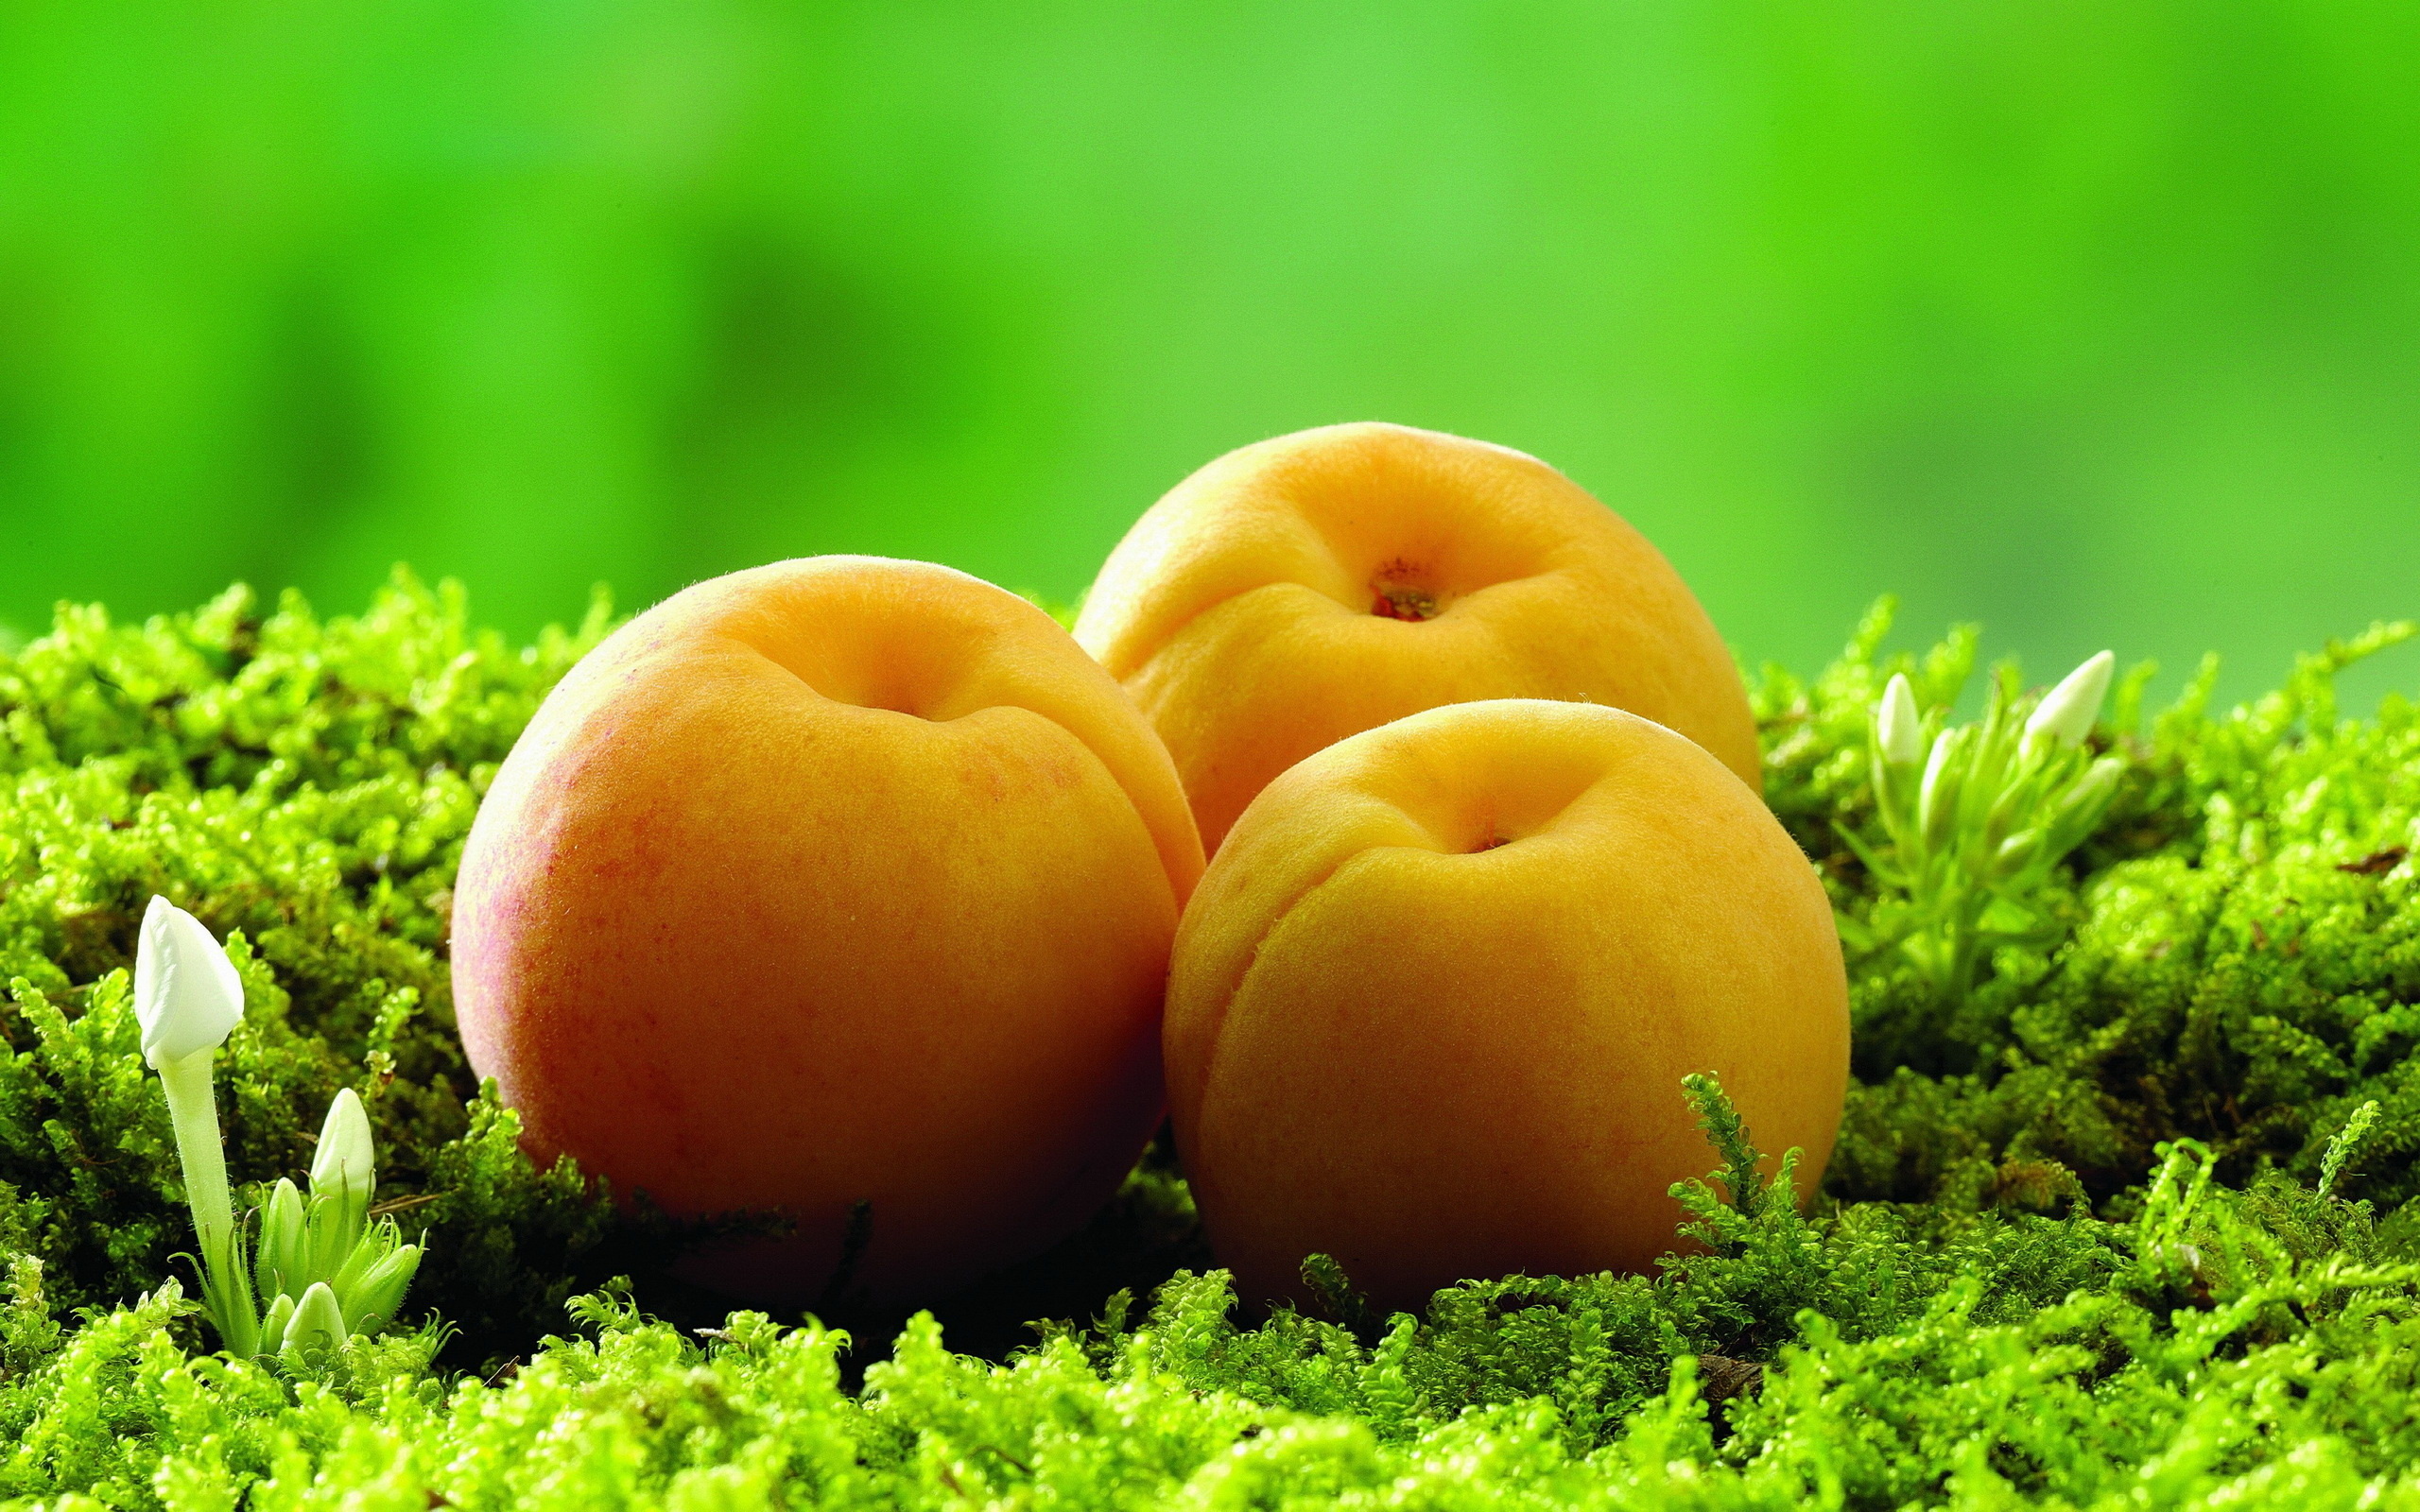 Apricot wallpaper, High-resolution image, Fruity goodness, Delicious and nutritious, 2560x1600 HD Desktop